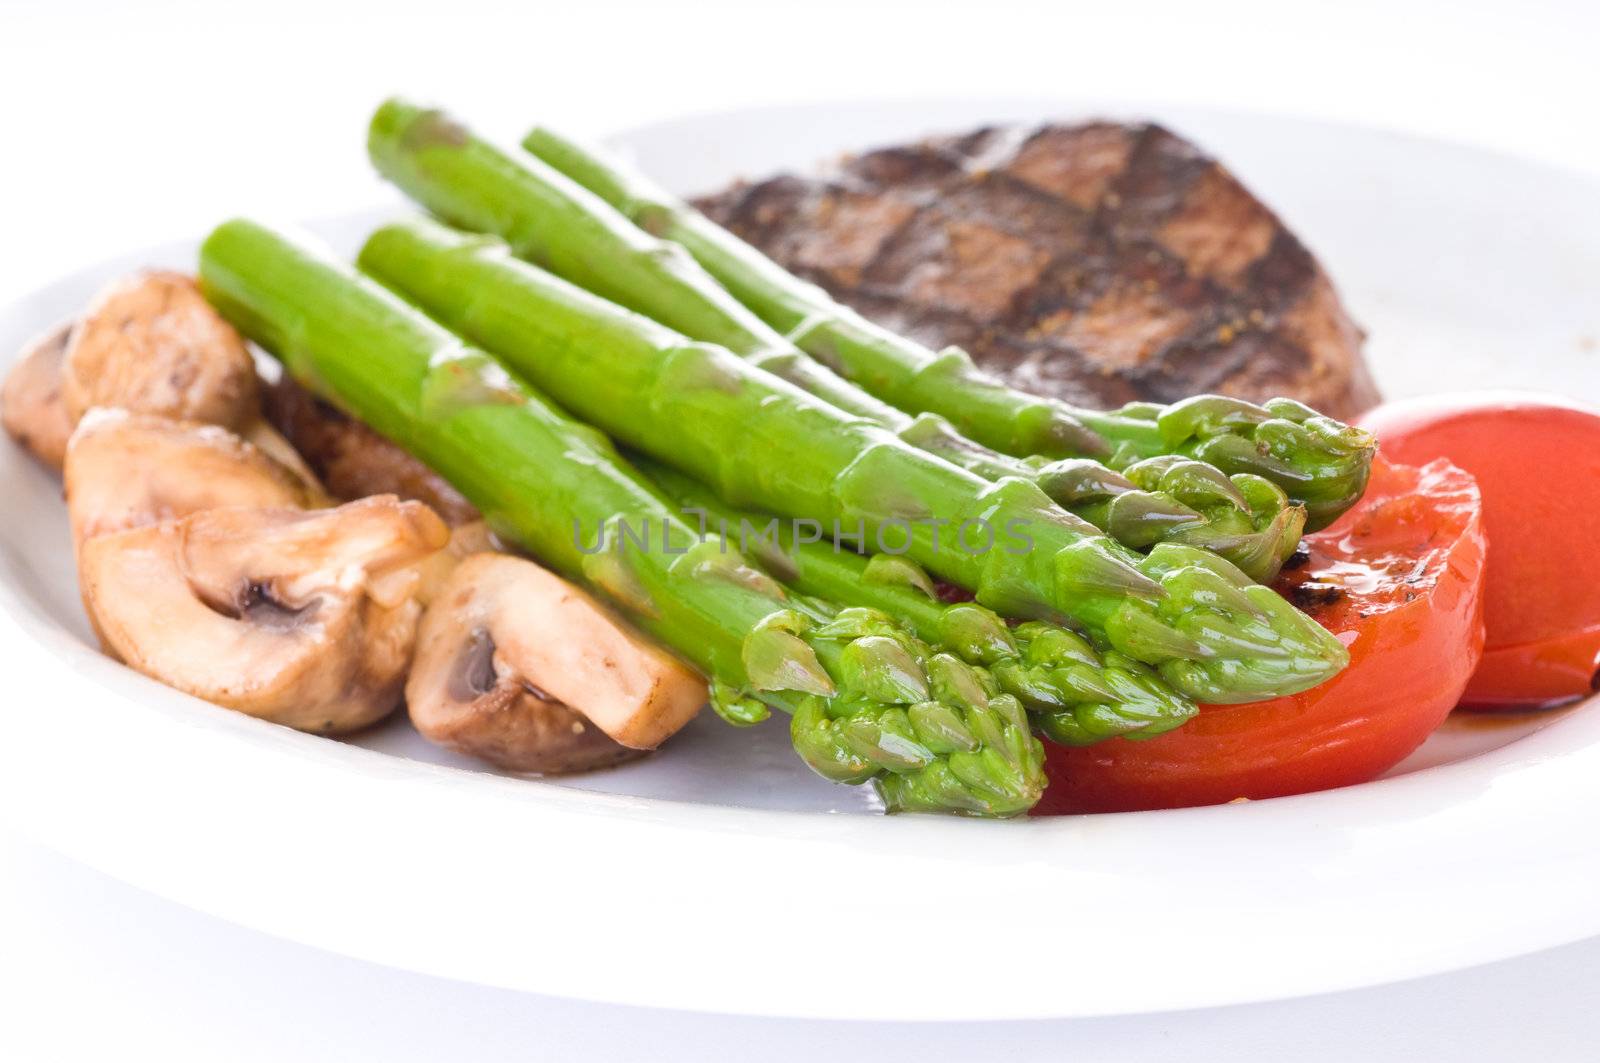 Fresh cooked asparagus accompanies a delicious meal.